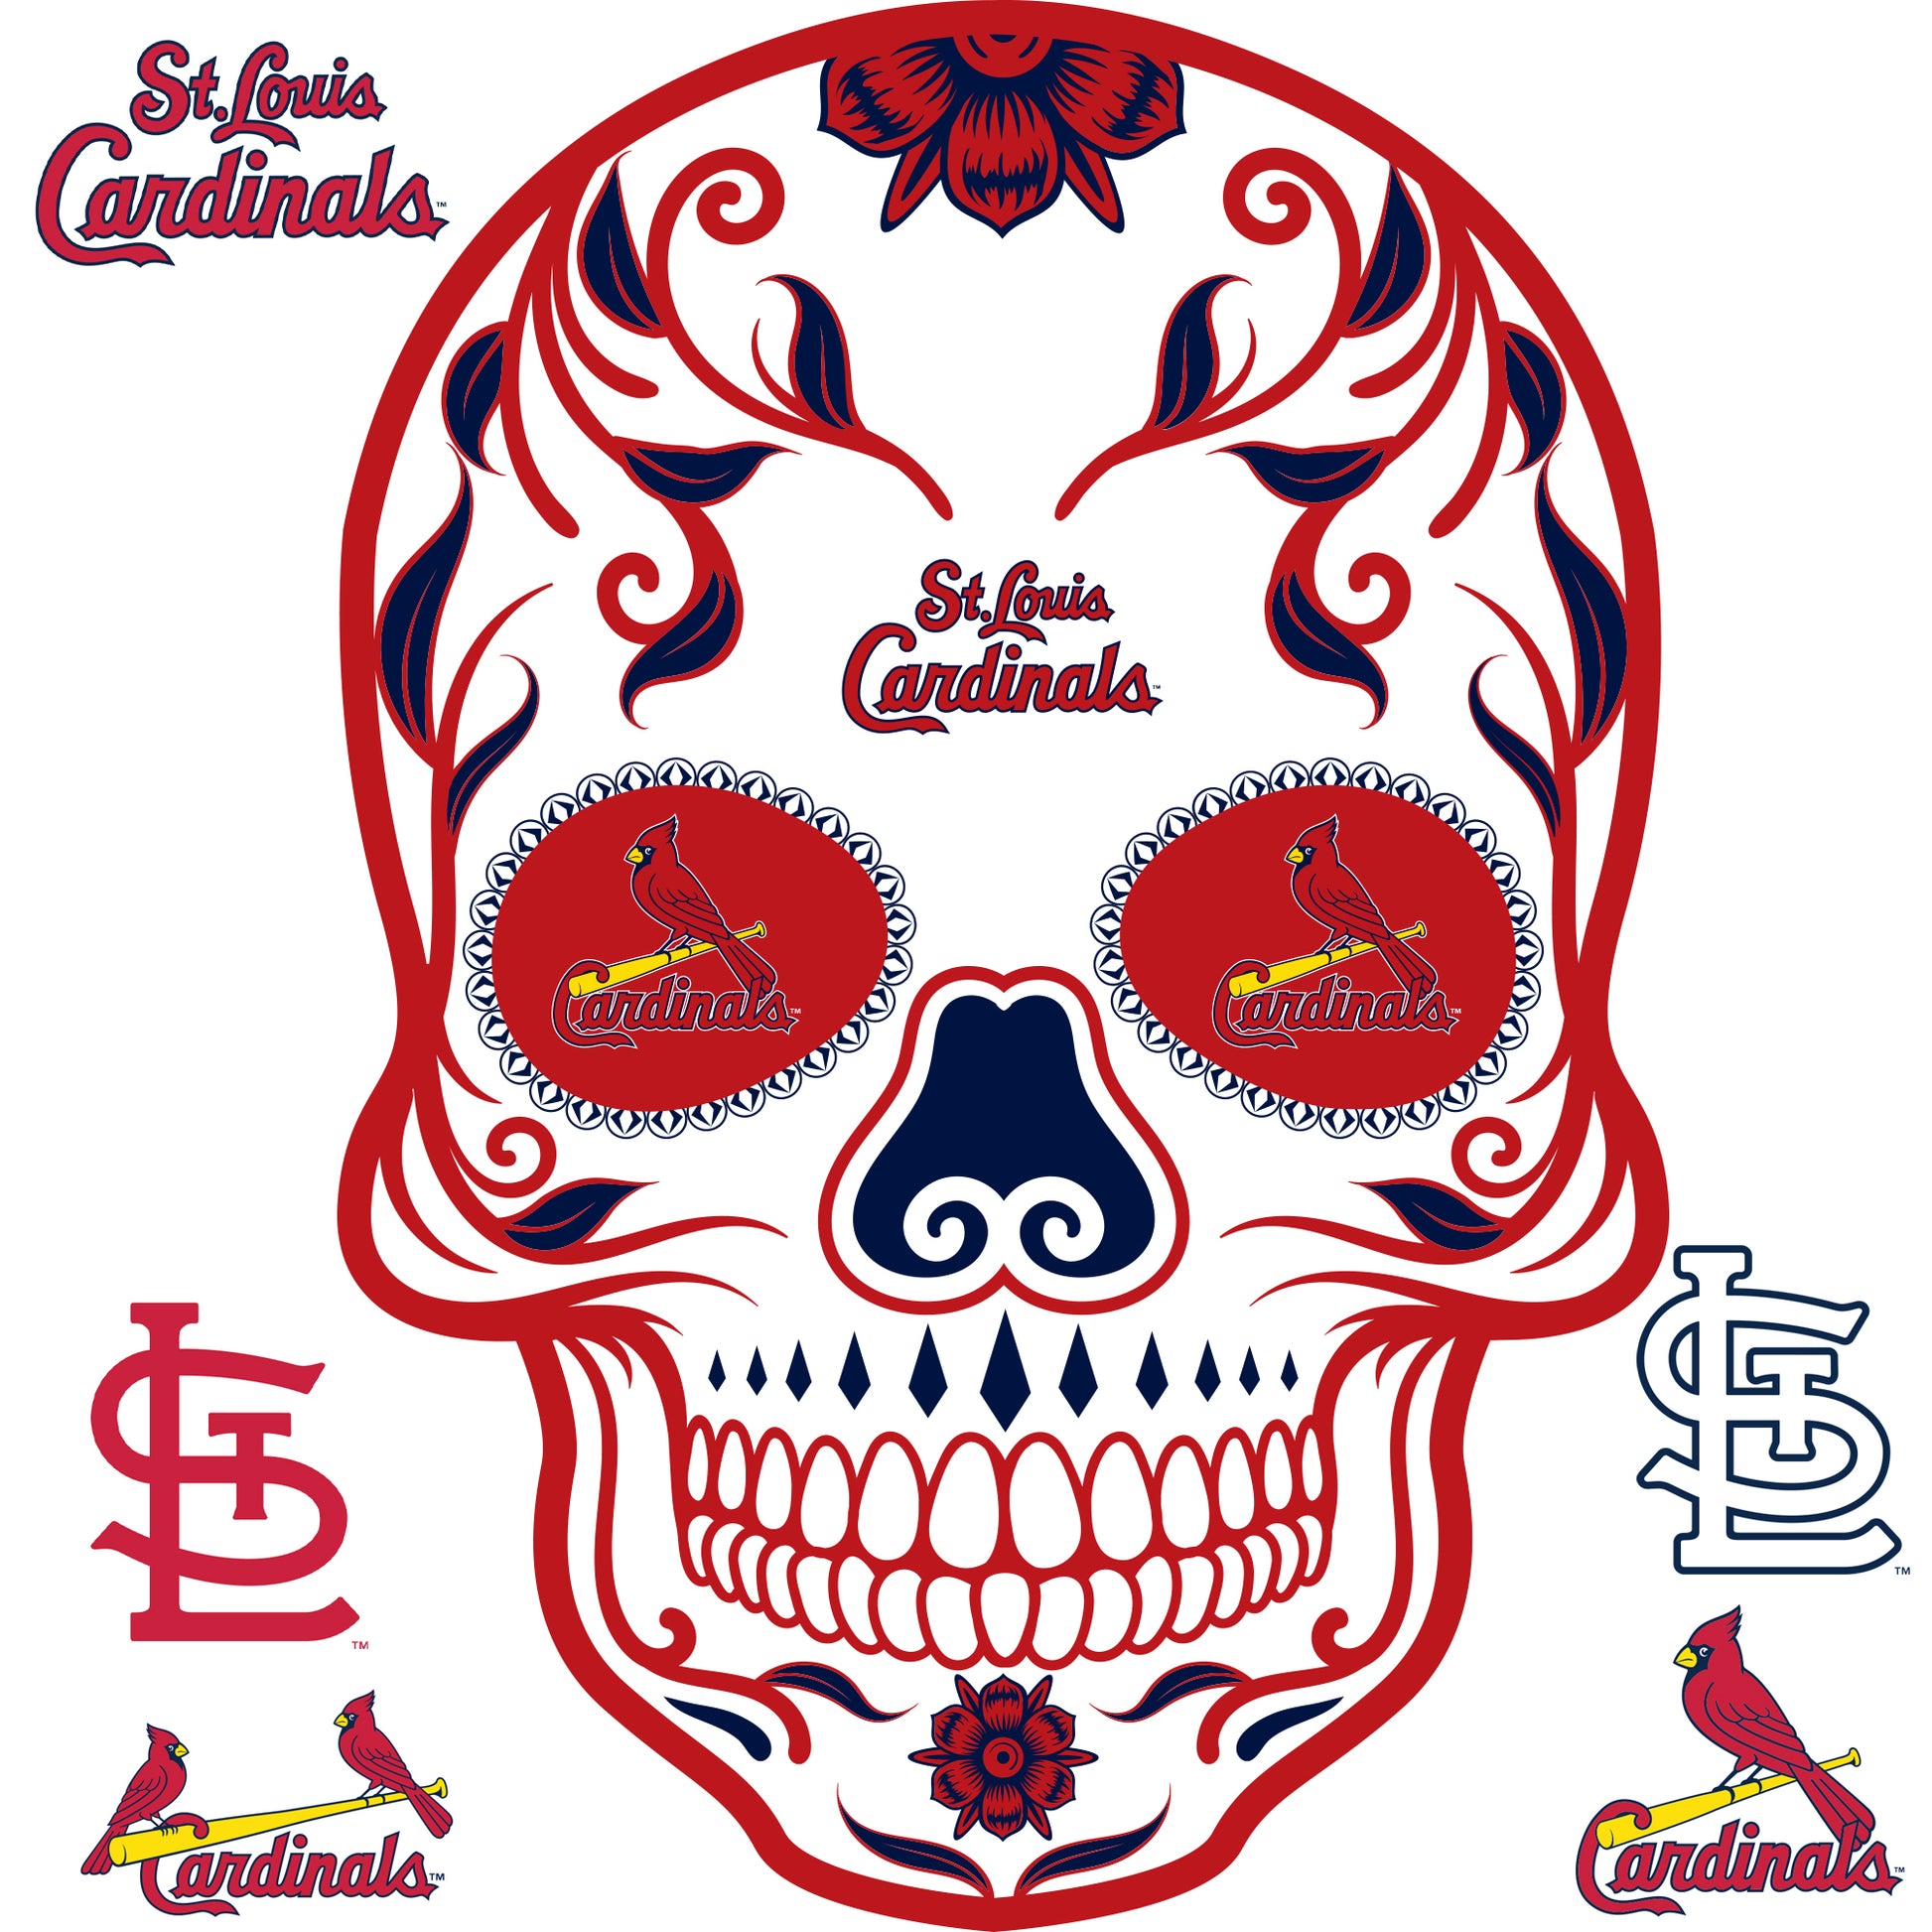 St. Louis Cardinals MLB Fan Decals for sale